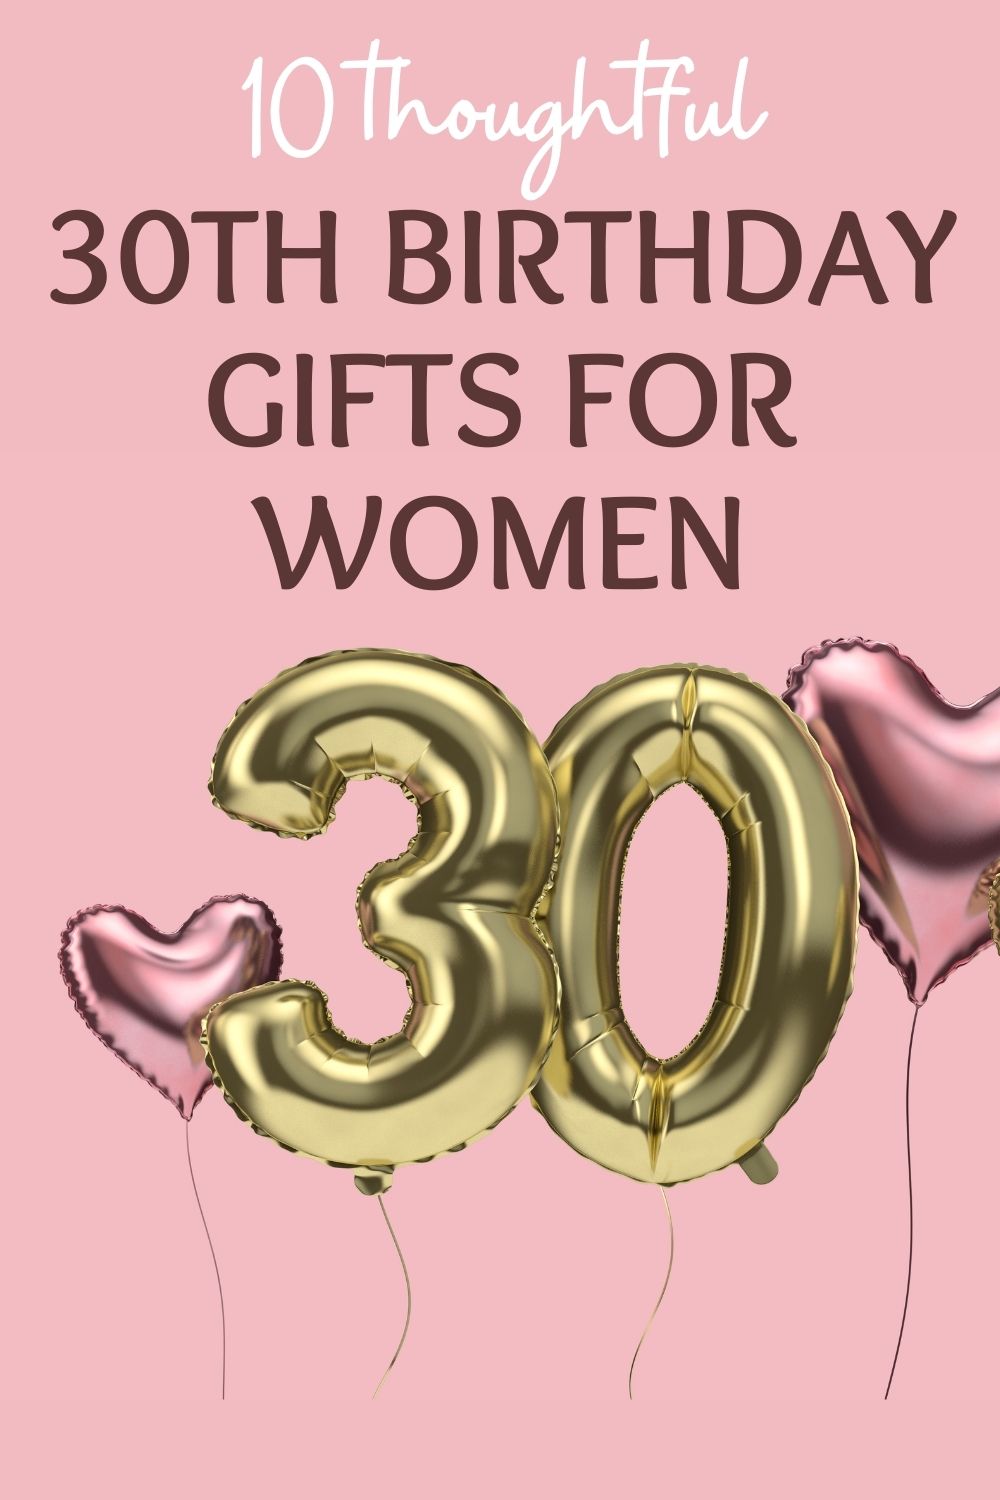 10 thoughtful 30th birthday gifts for women